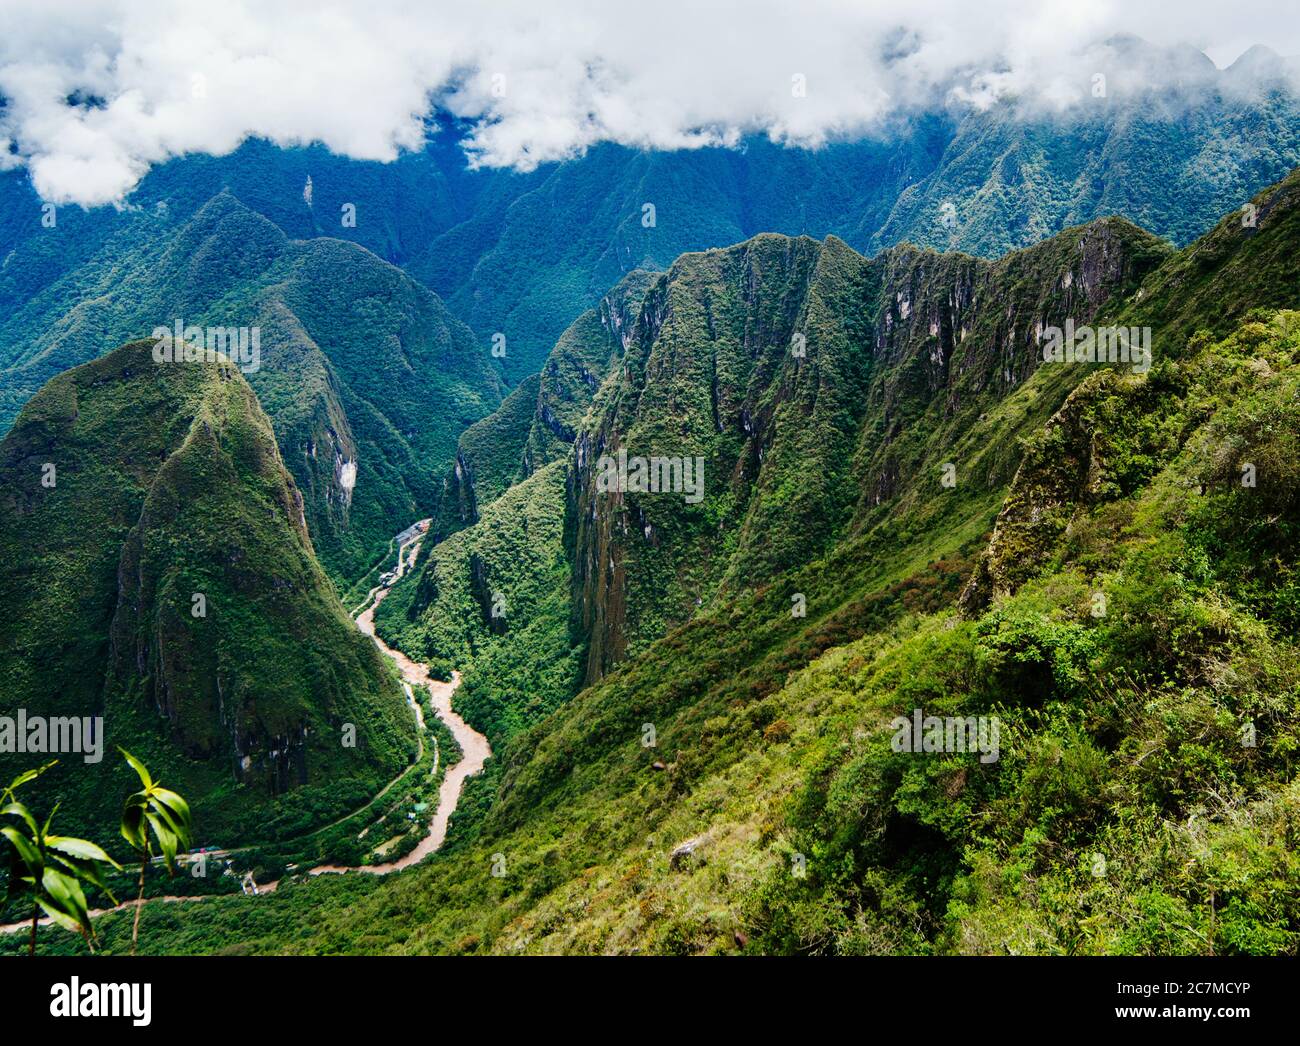 The Urubamba River flowing through the green Andes mountains and the town of Aguas Calientes, Cusco, Peru, South America Stock Photo